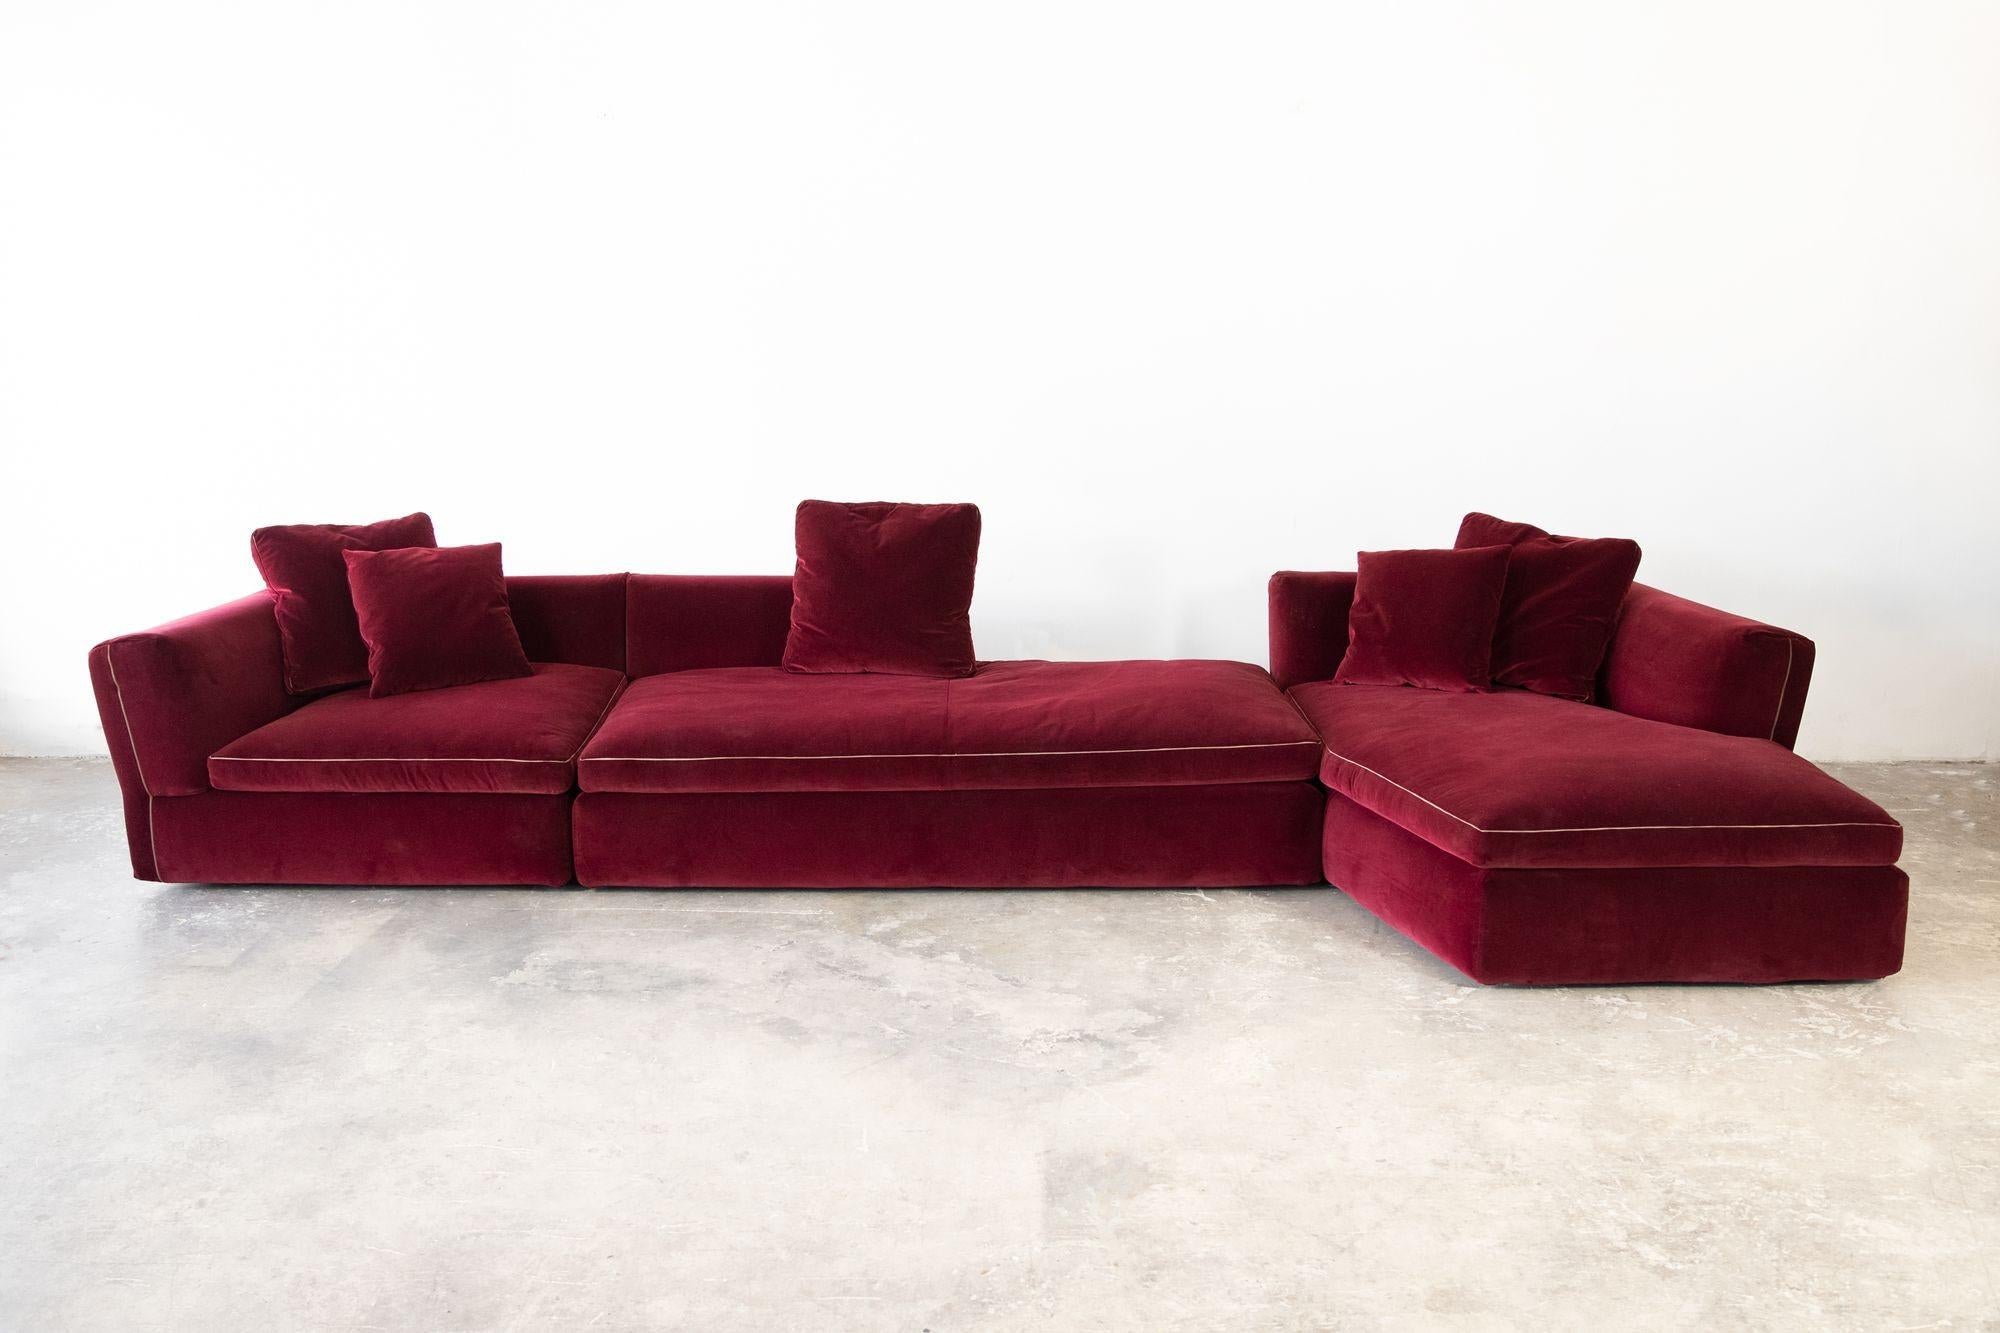 Three-piece velvet Cassina Sectional sofa designed by Rudolfo Dordoni. Upholstered in a high-grade deep wine-colored velvet. Purchased new but never installed. Can be reconfigured to your liking. Extraordinarily well made. Sexy and comfortable.